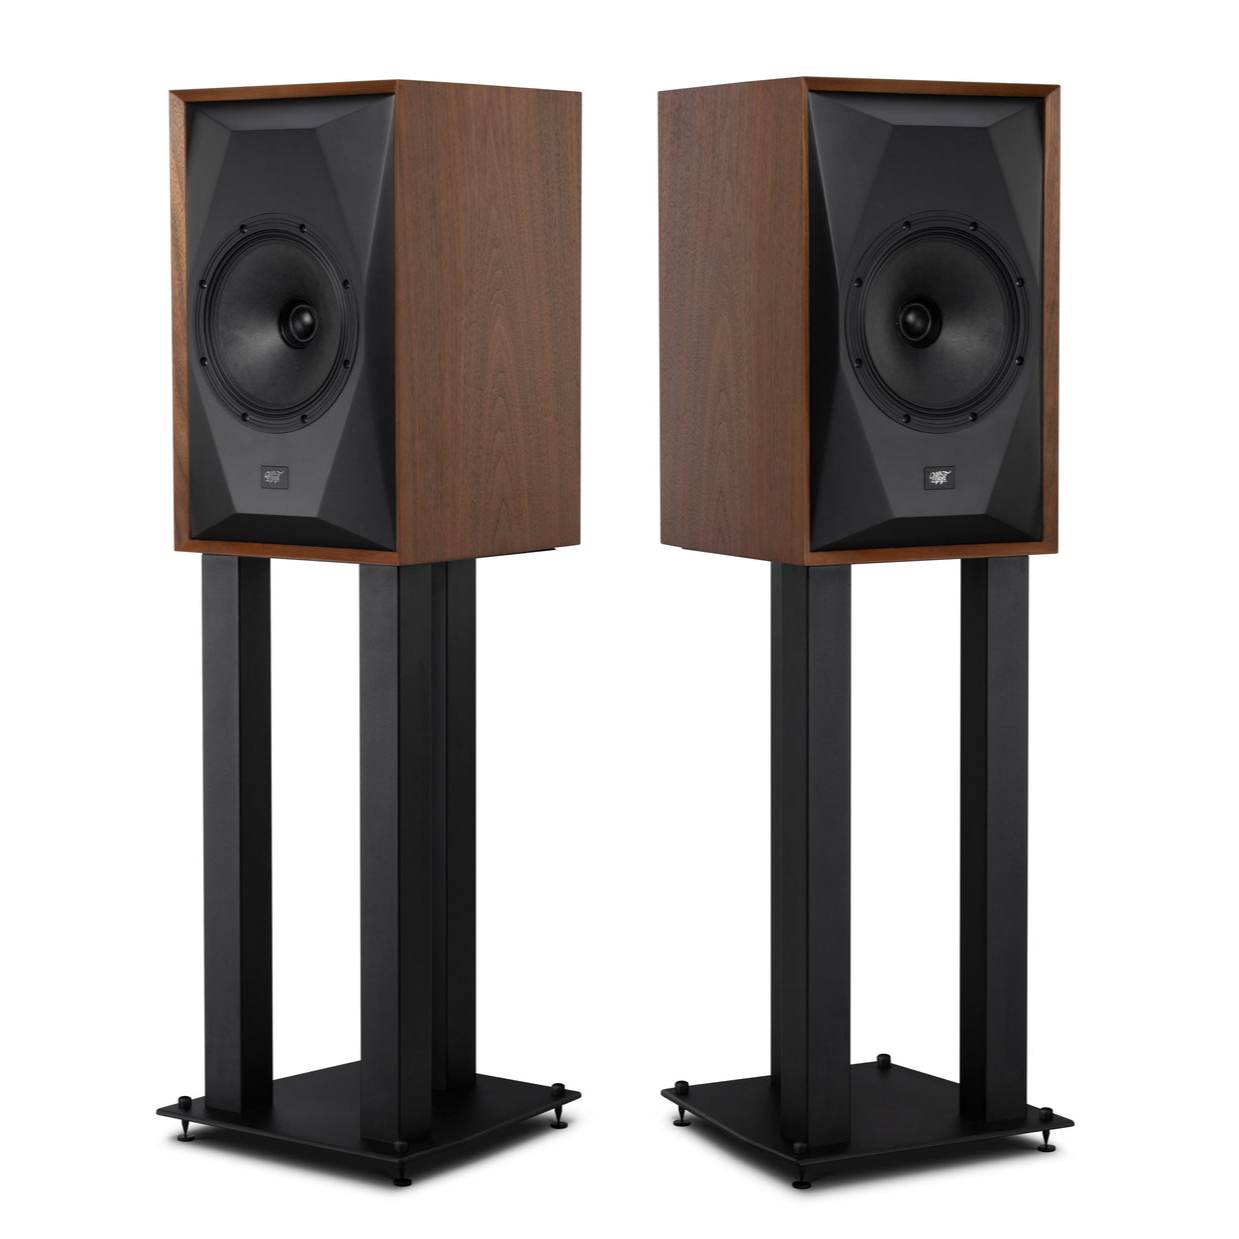 MOBILE FIDELITY SOURCEPOINT 8 SPEAKER STANDS (PAIR) | VINYL SOUND Exclusively designed for Mobile Fidelity SourcePoint 8 bookshelf loudspeakers, these 22-inch-tall steel stands raise your speakers to the ideal listening height and provide vibration-resistant support. The three-pole design can also be filled for extra stability.